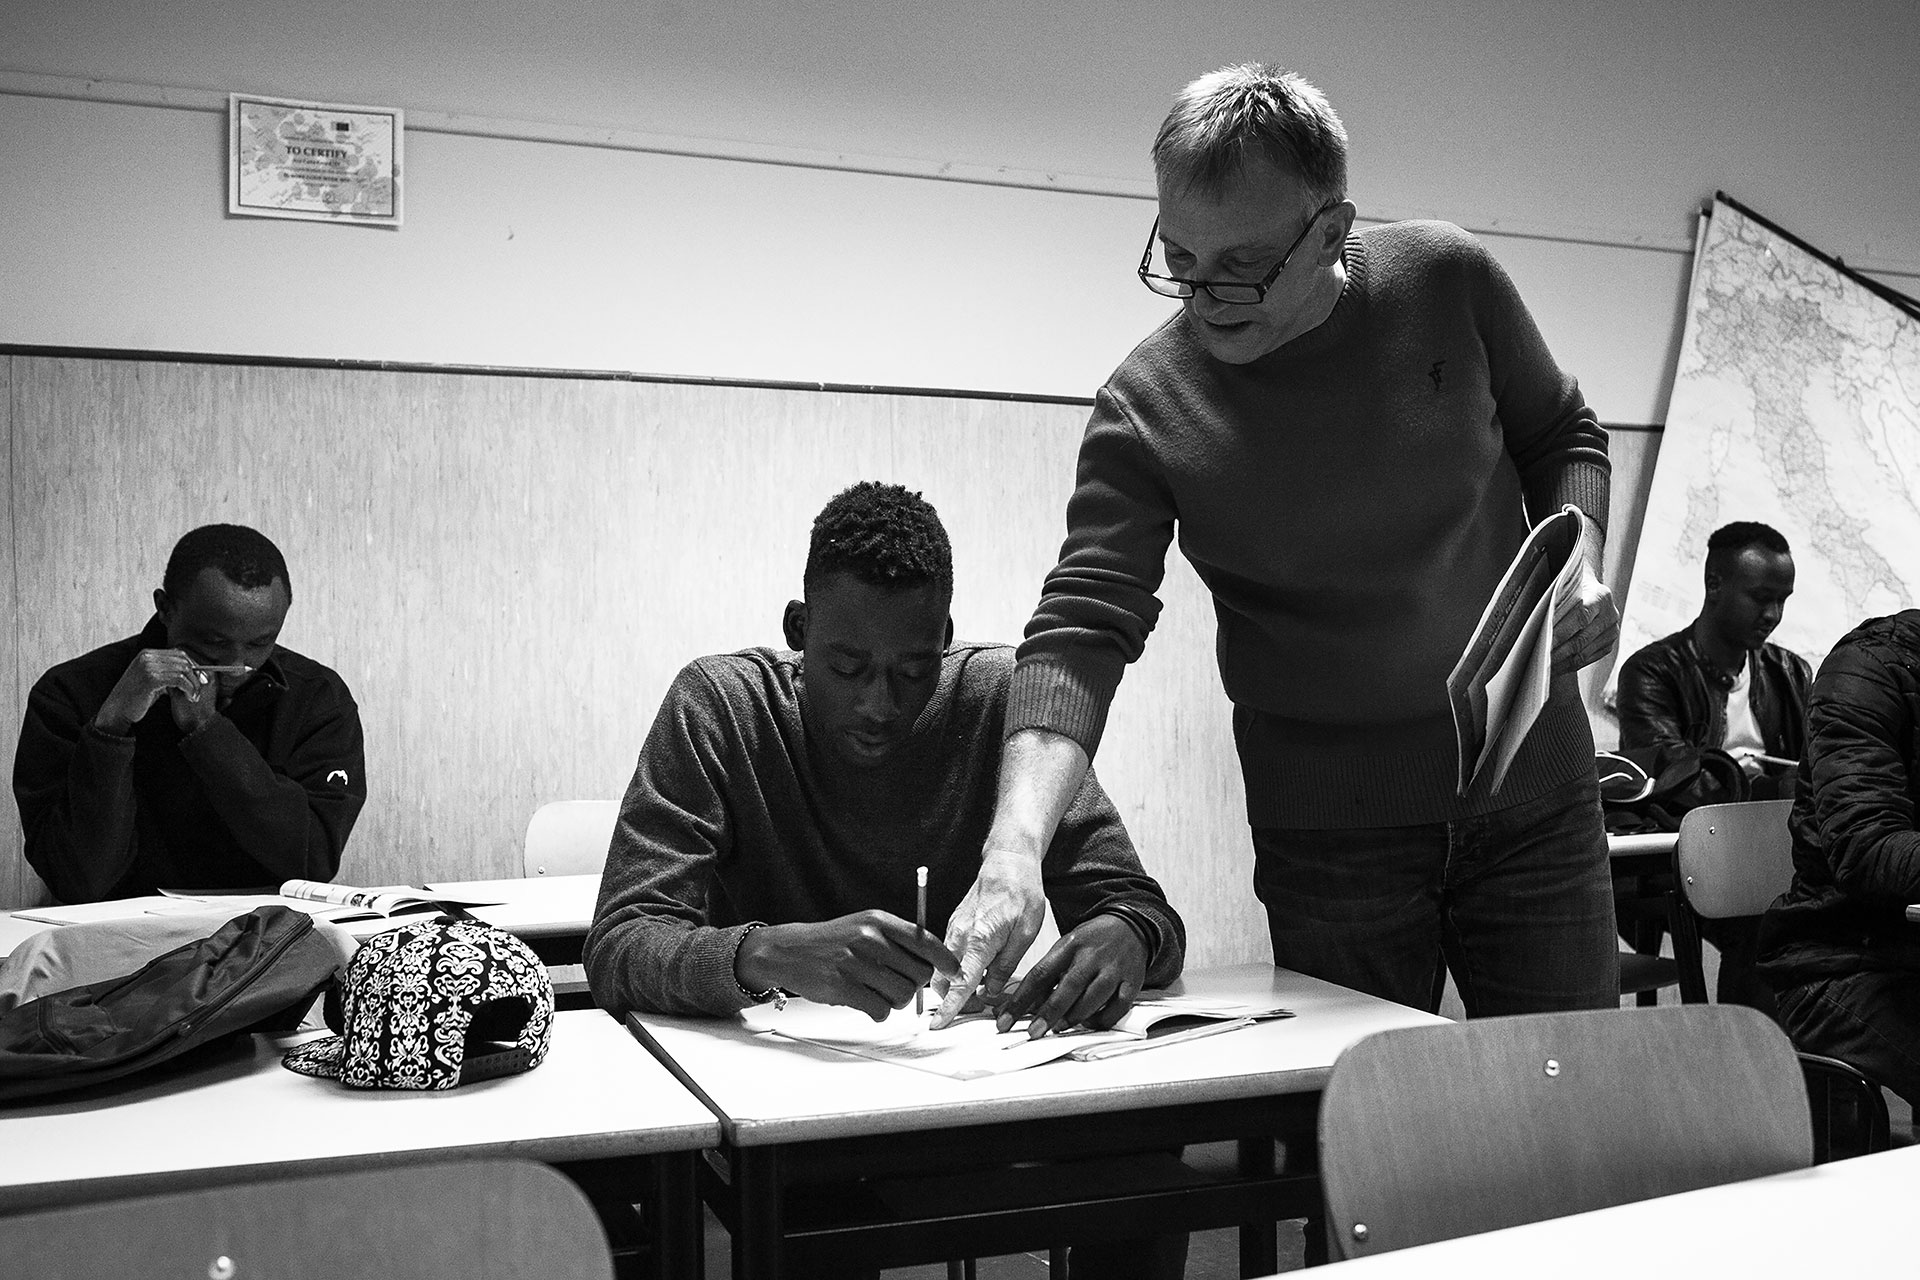 Malick has Italian lessons twice a week. In these classes he and his fellow refugees learn the basics of conversation as well as how to prepare a CV.